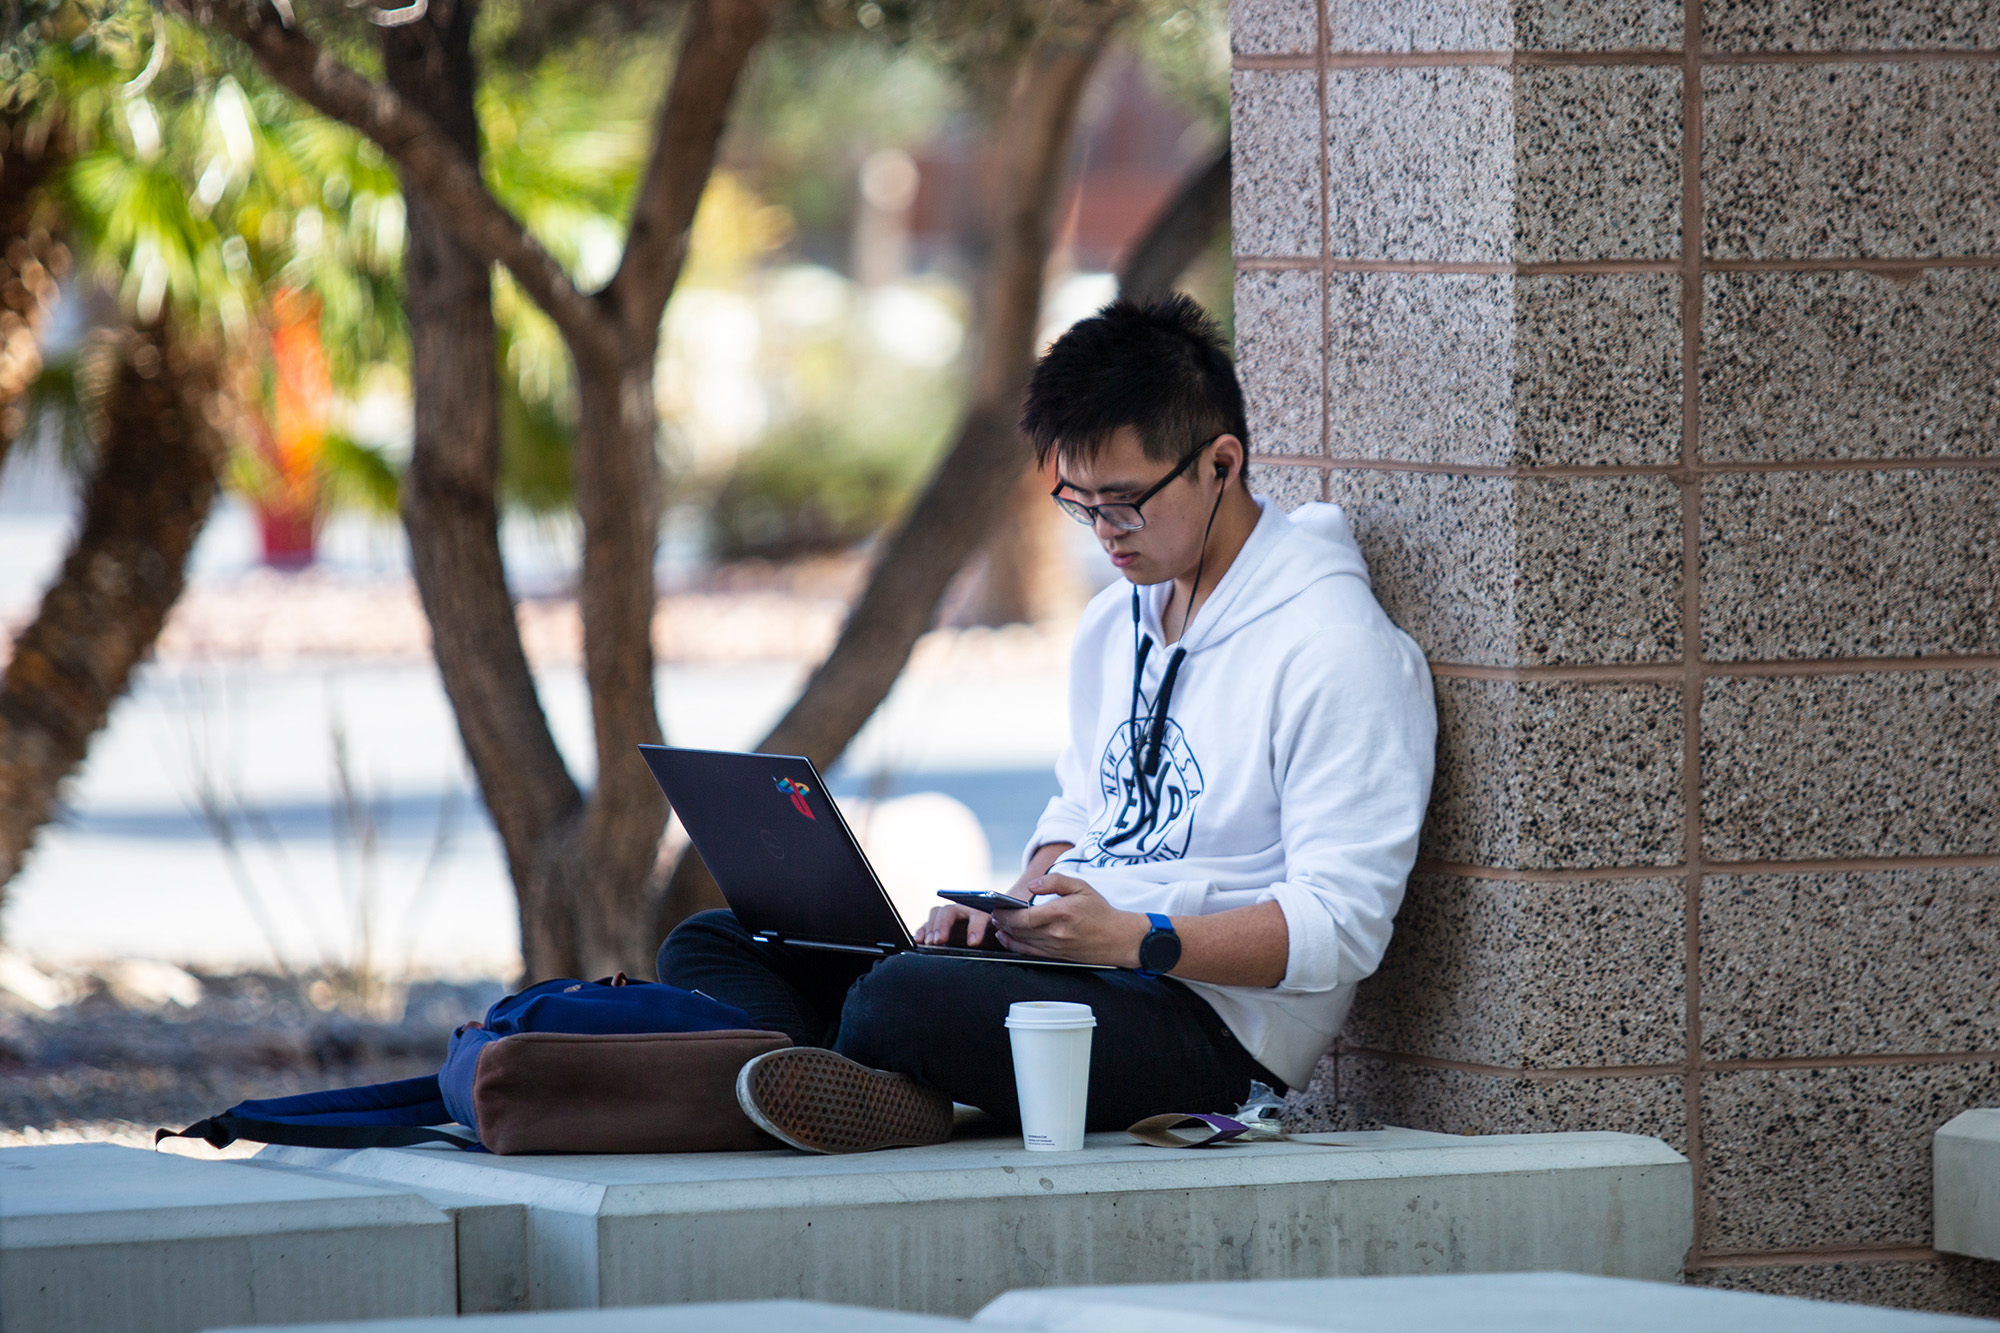 A student seated outside with his laptop and phone.